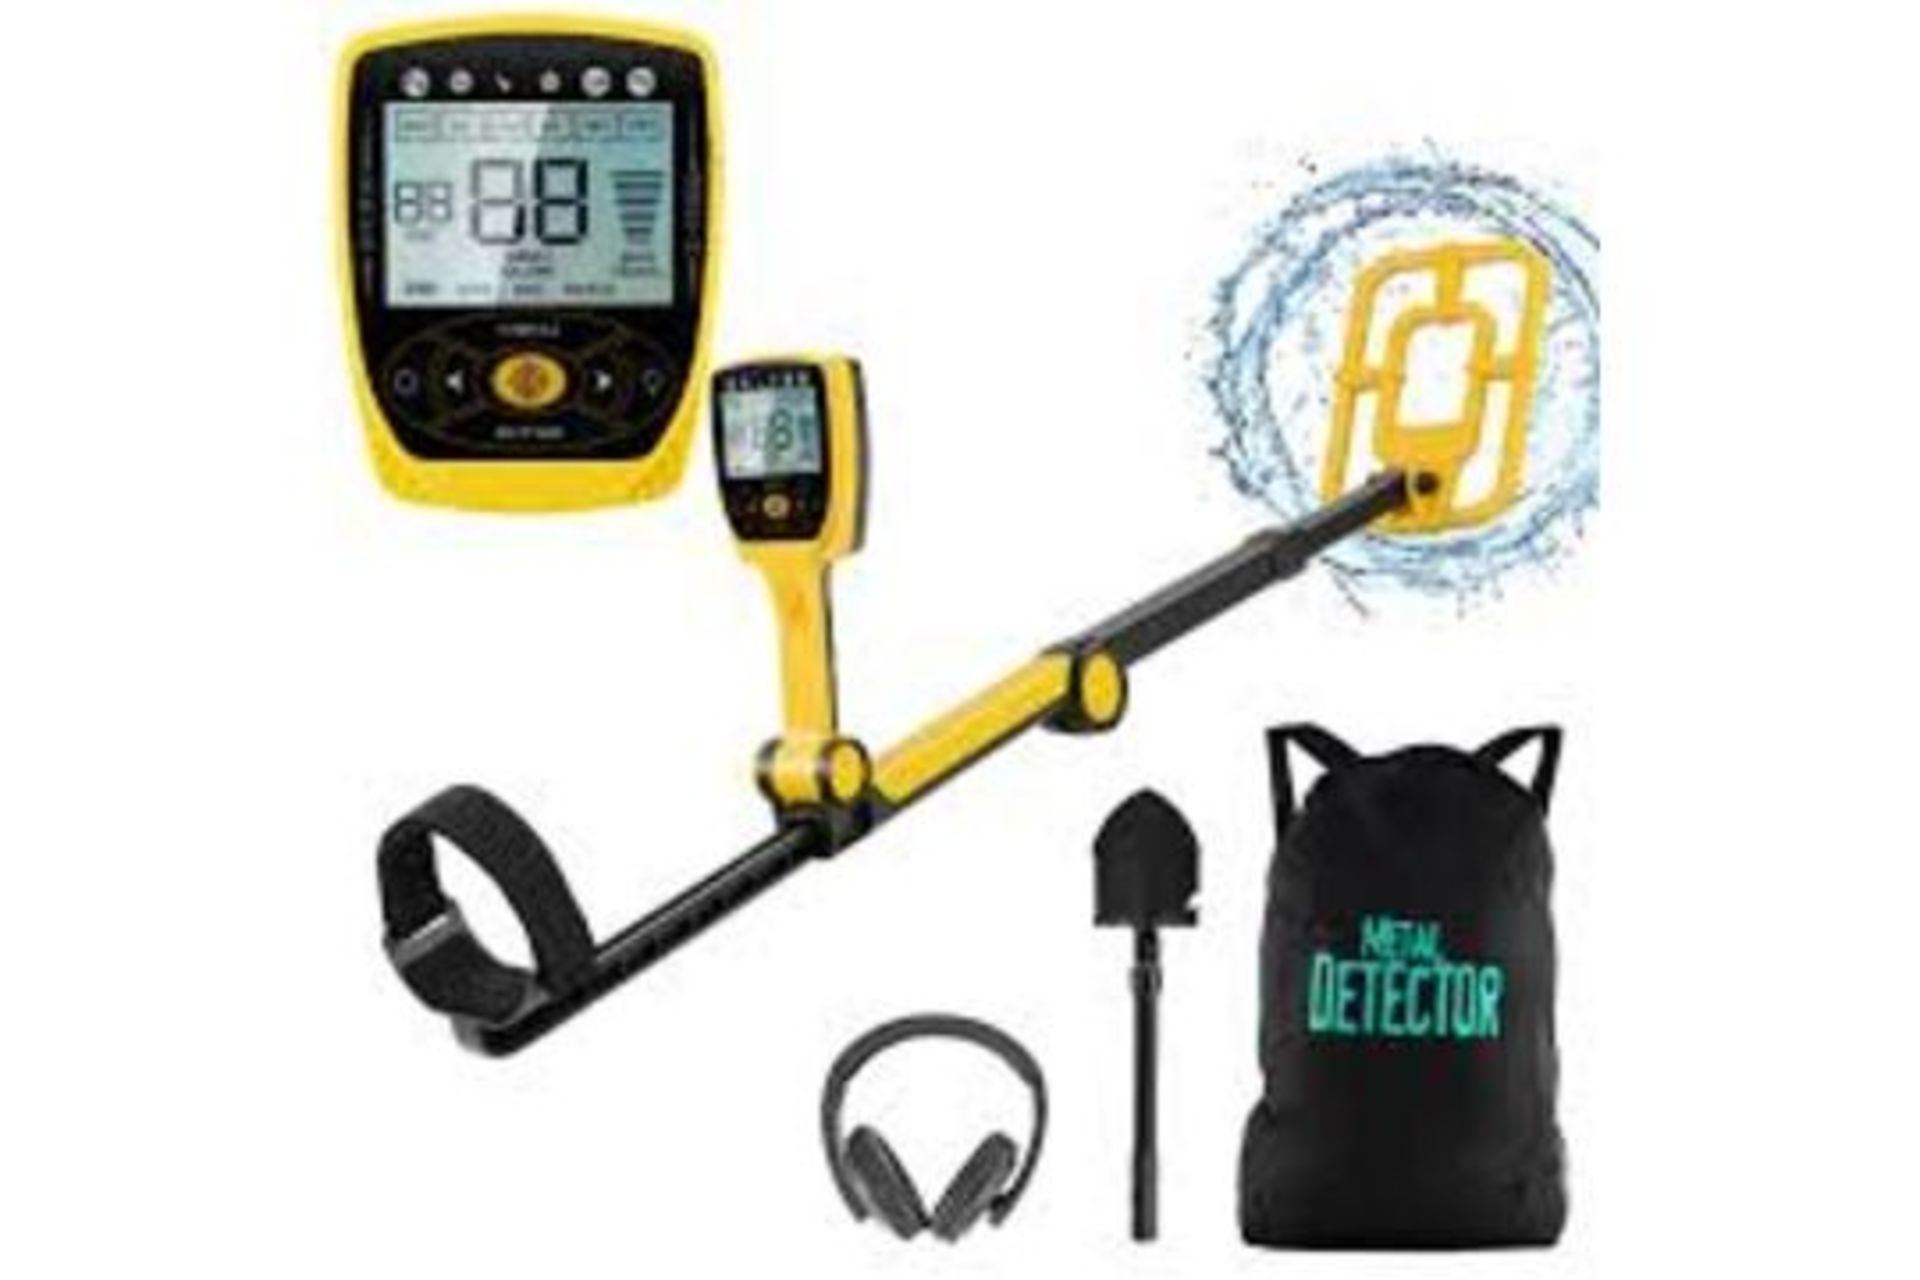 Professional Metal Detector w/ 4 Search Modes & Memory Function. - R14.14